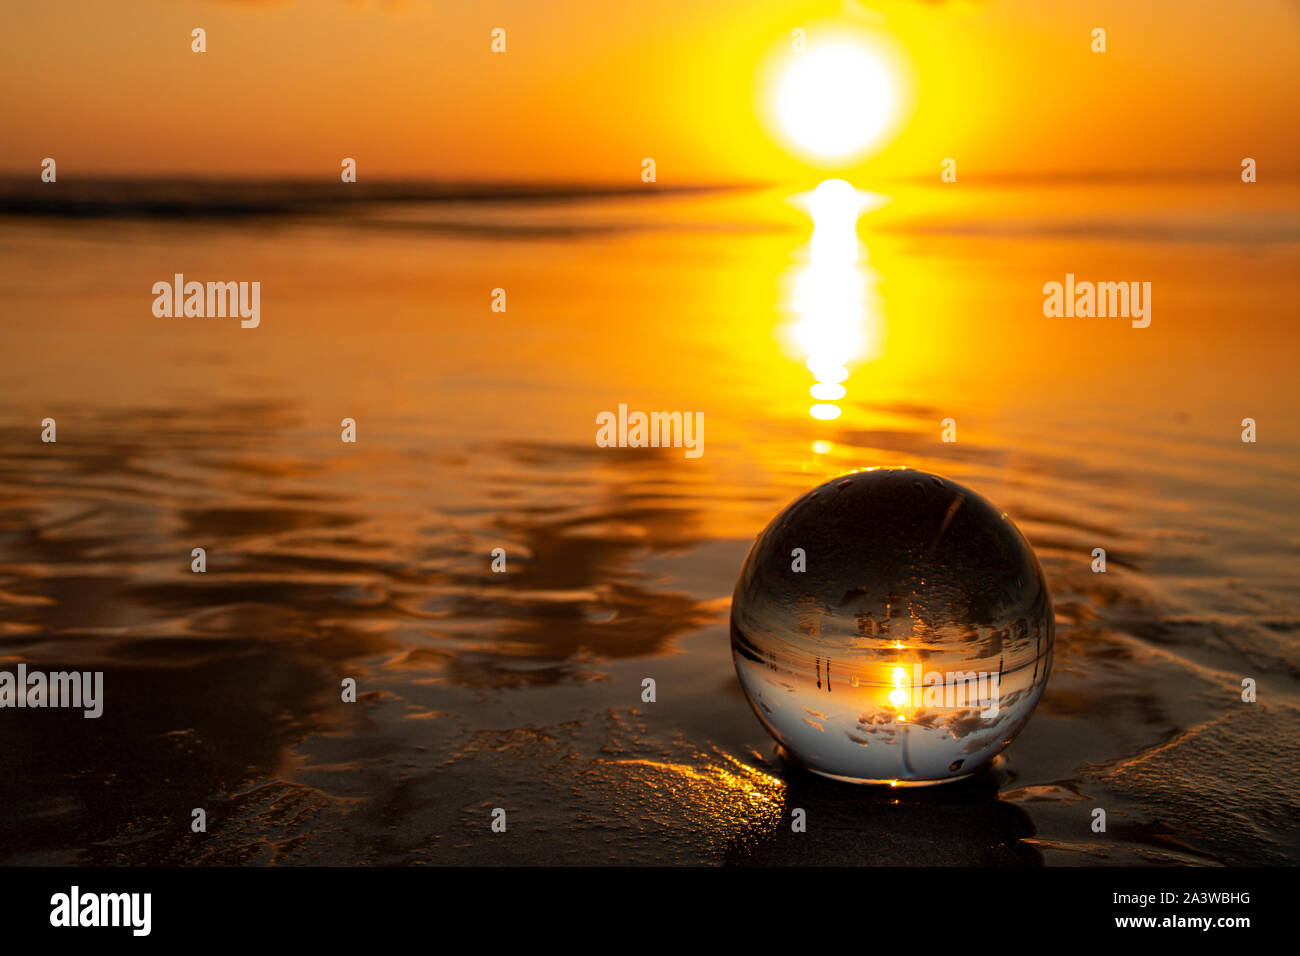 A beautiful sunset seen trough a little lensball. I captured this picture at a beach in a small city in Bali, Indonesia. Stock Photo